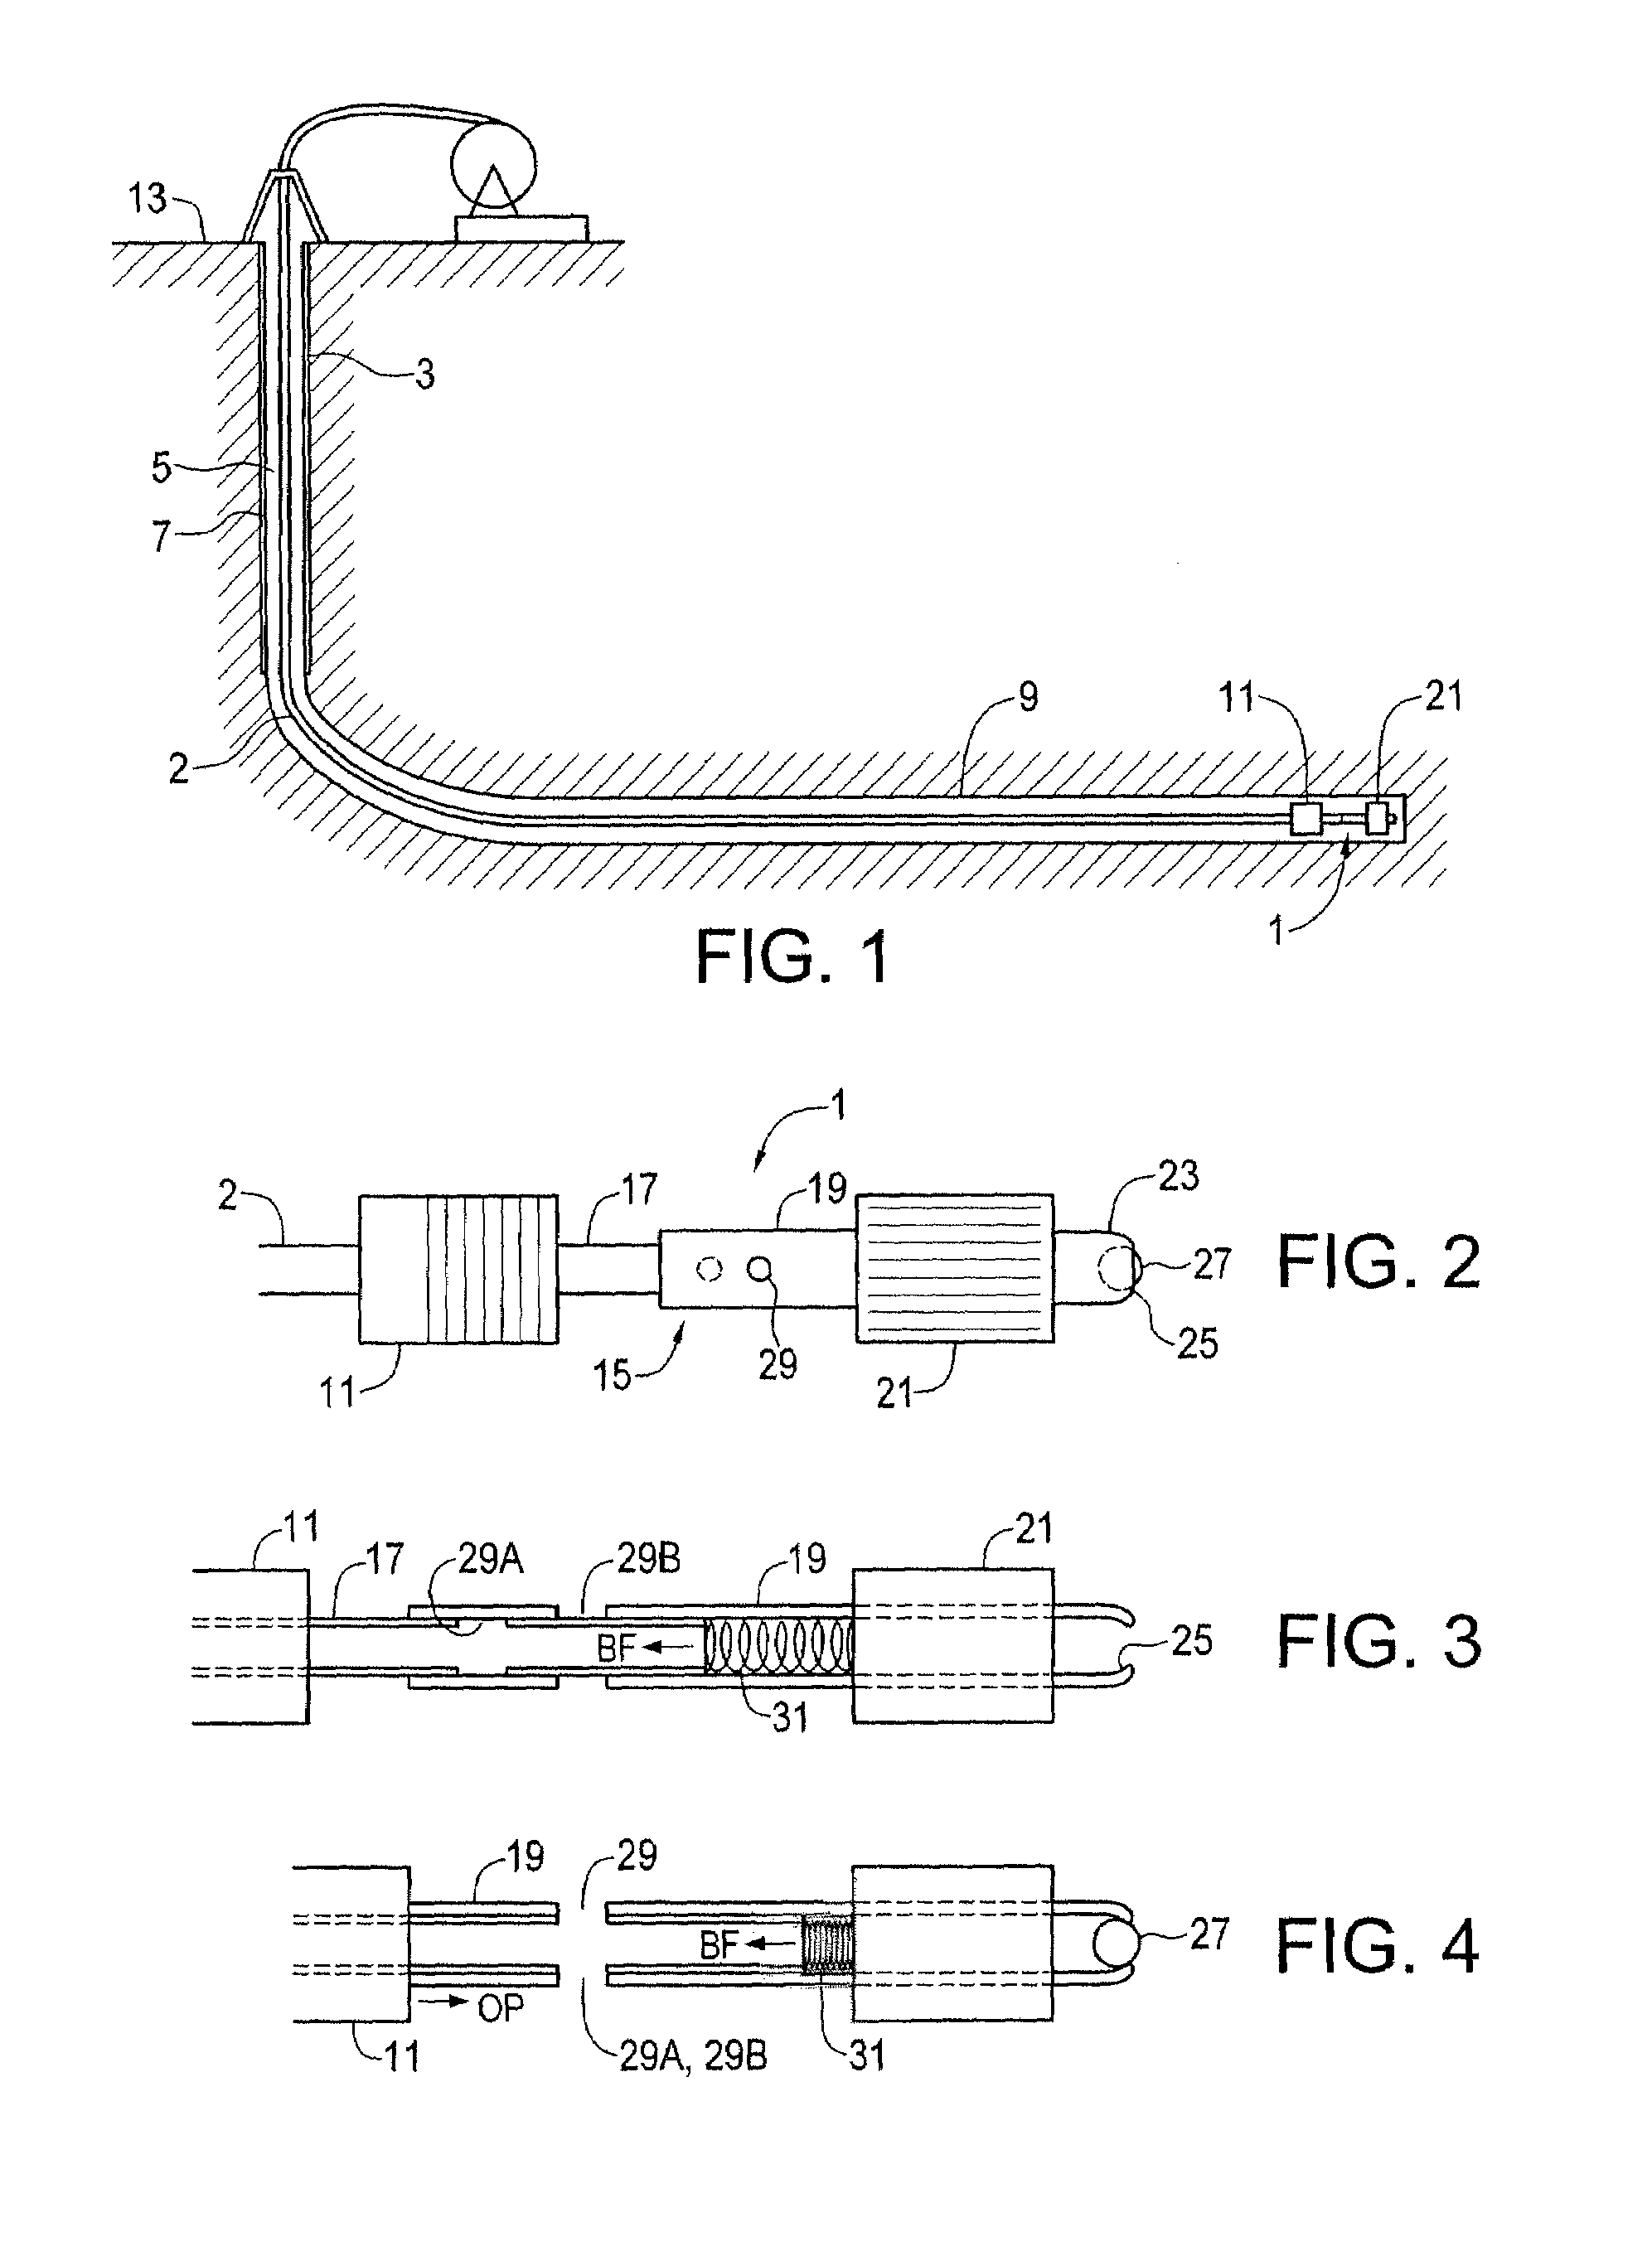 Isolating well bore portions for fracturing and the like